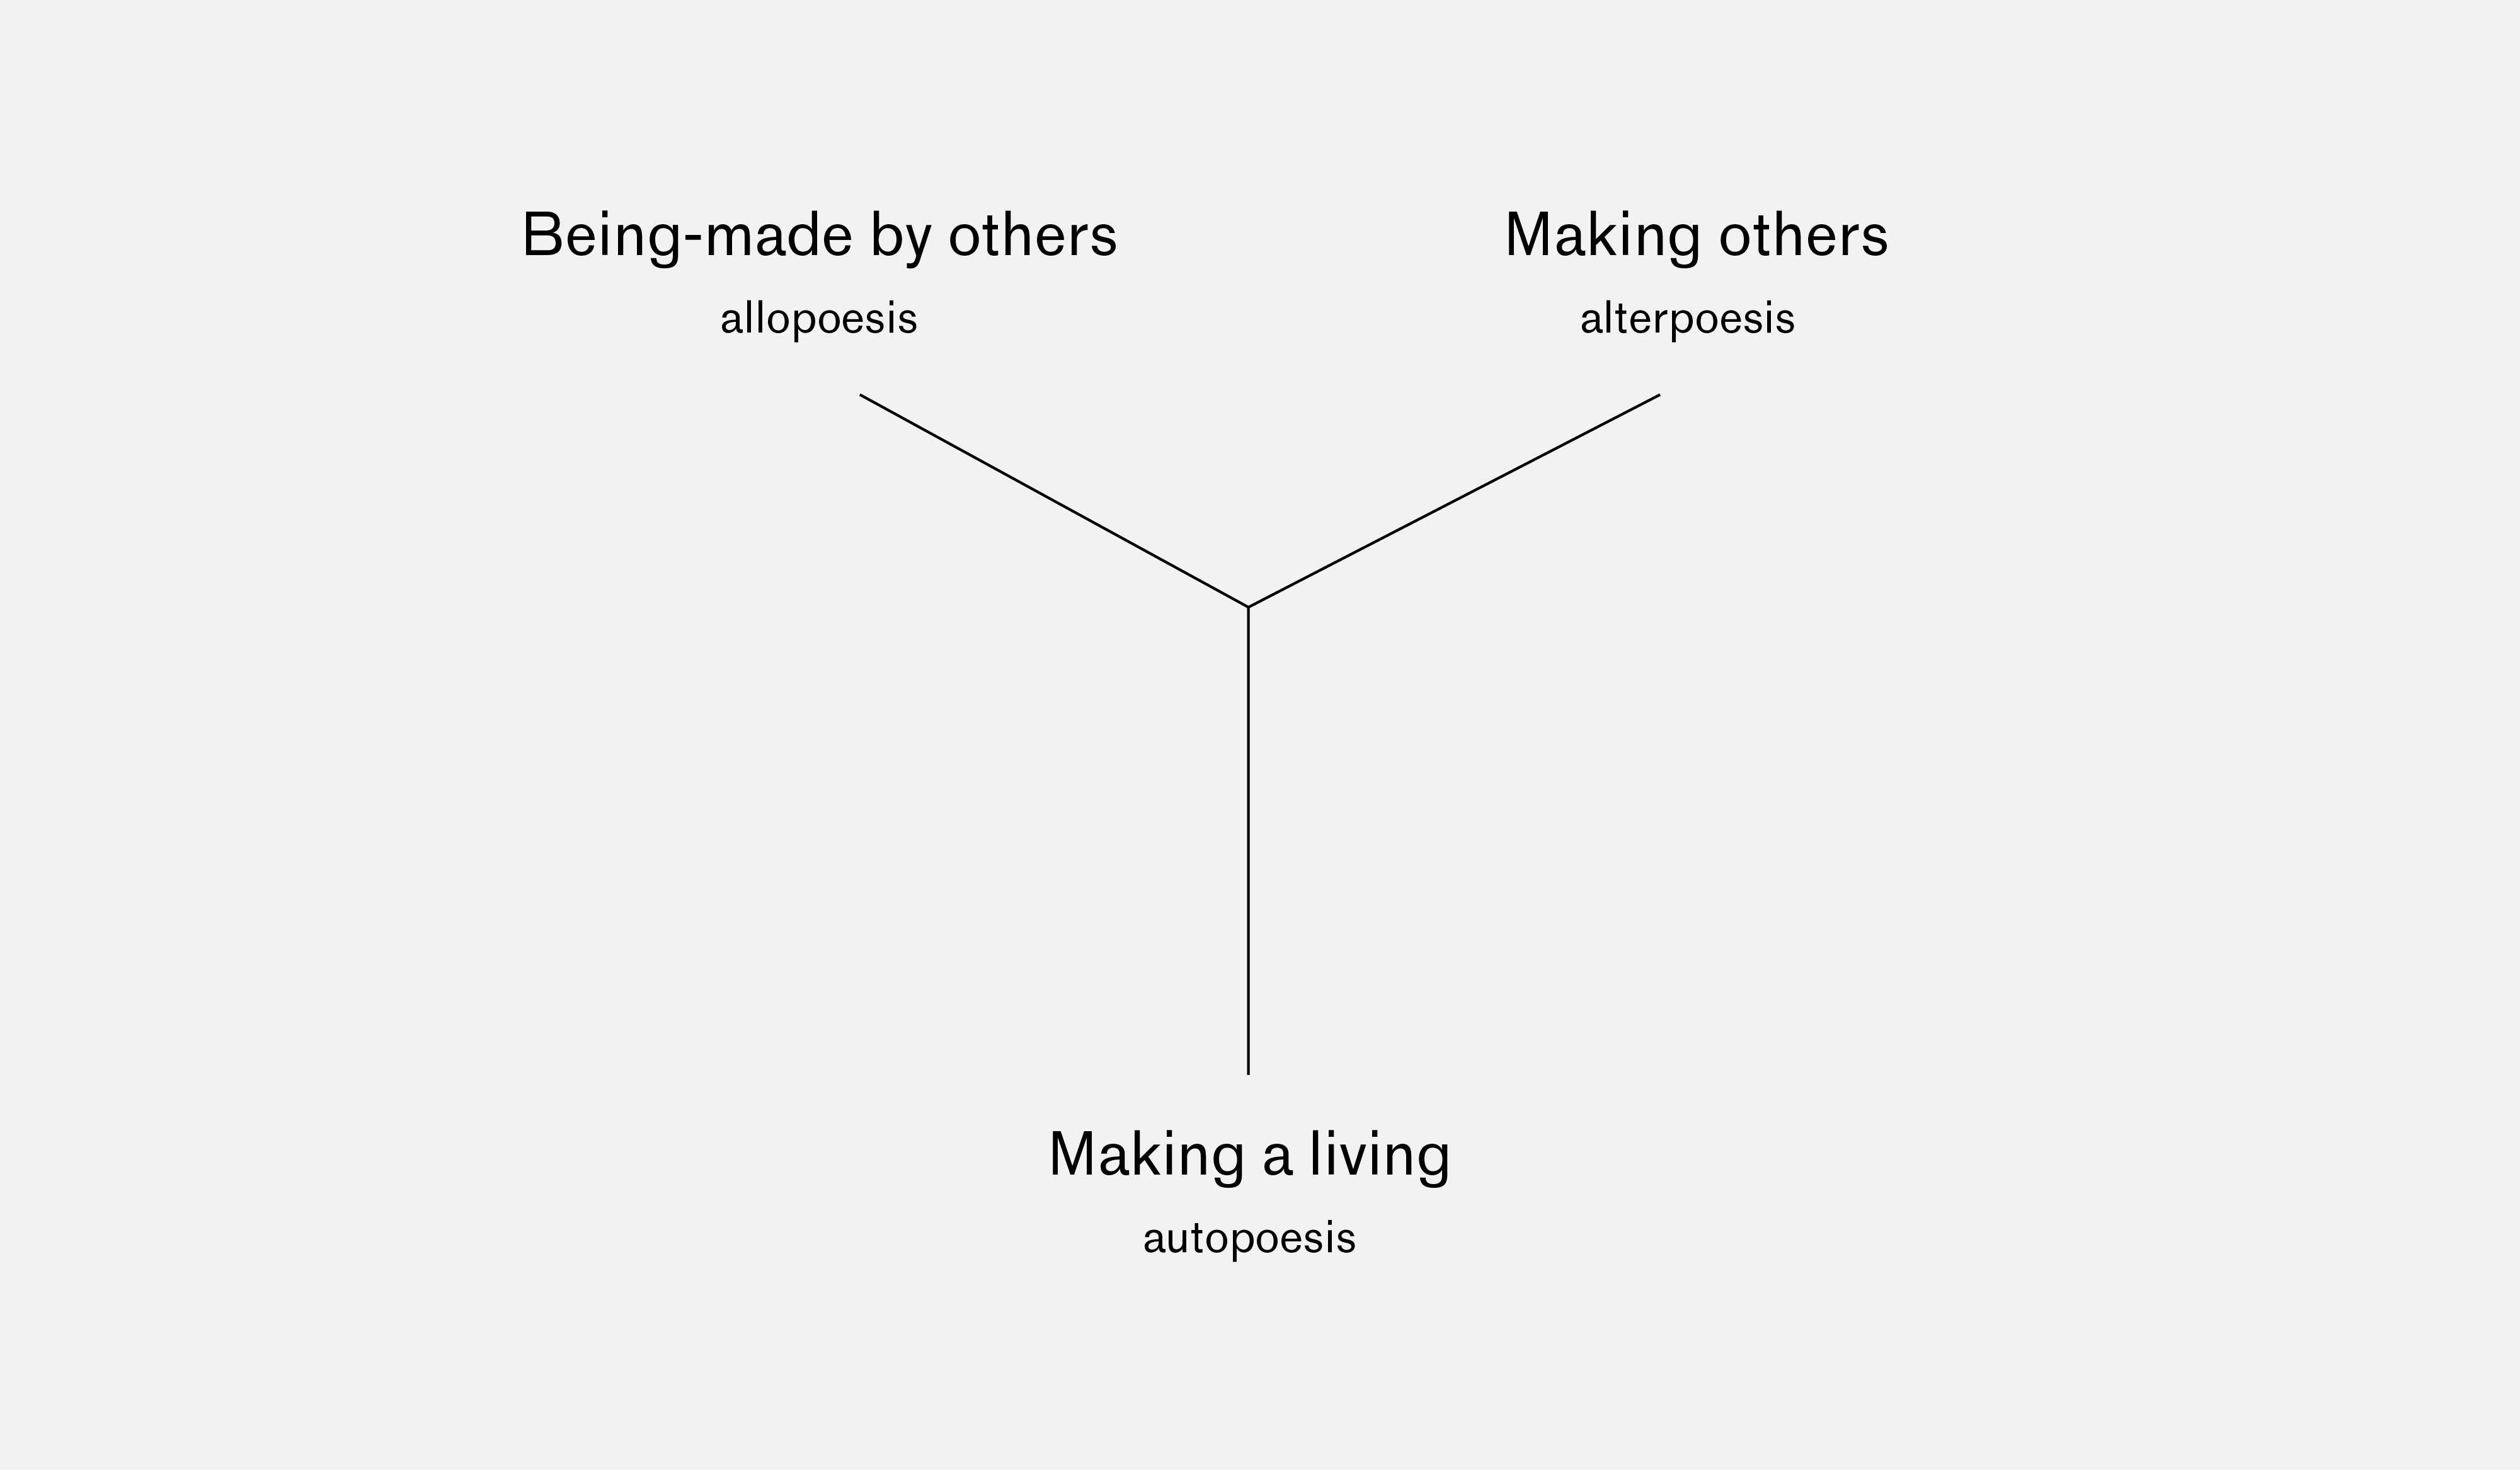 Livelihoods Triad by Ethan Miller. There are three lines converging in a point in the middle. Each line is labelled: being-made by others, making others and making a living.